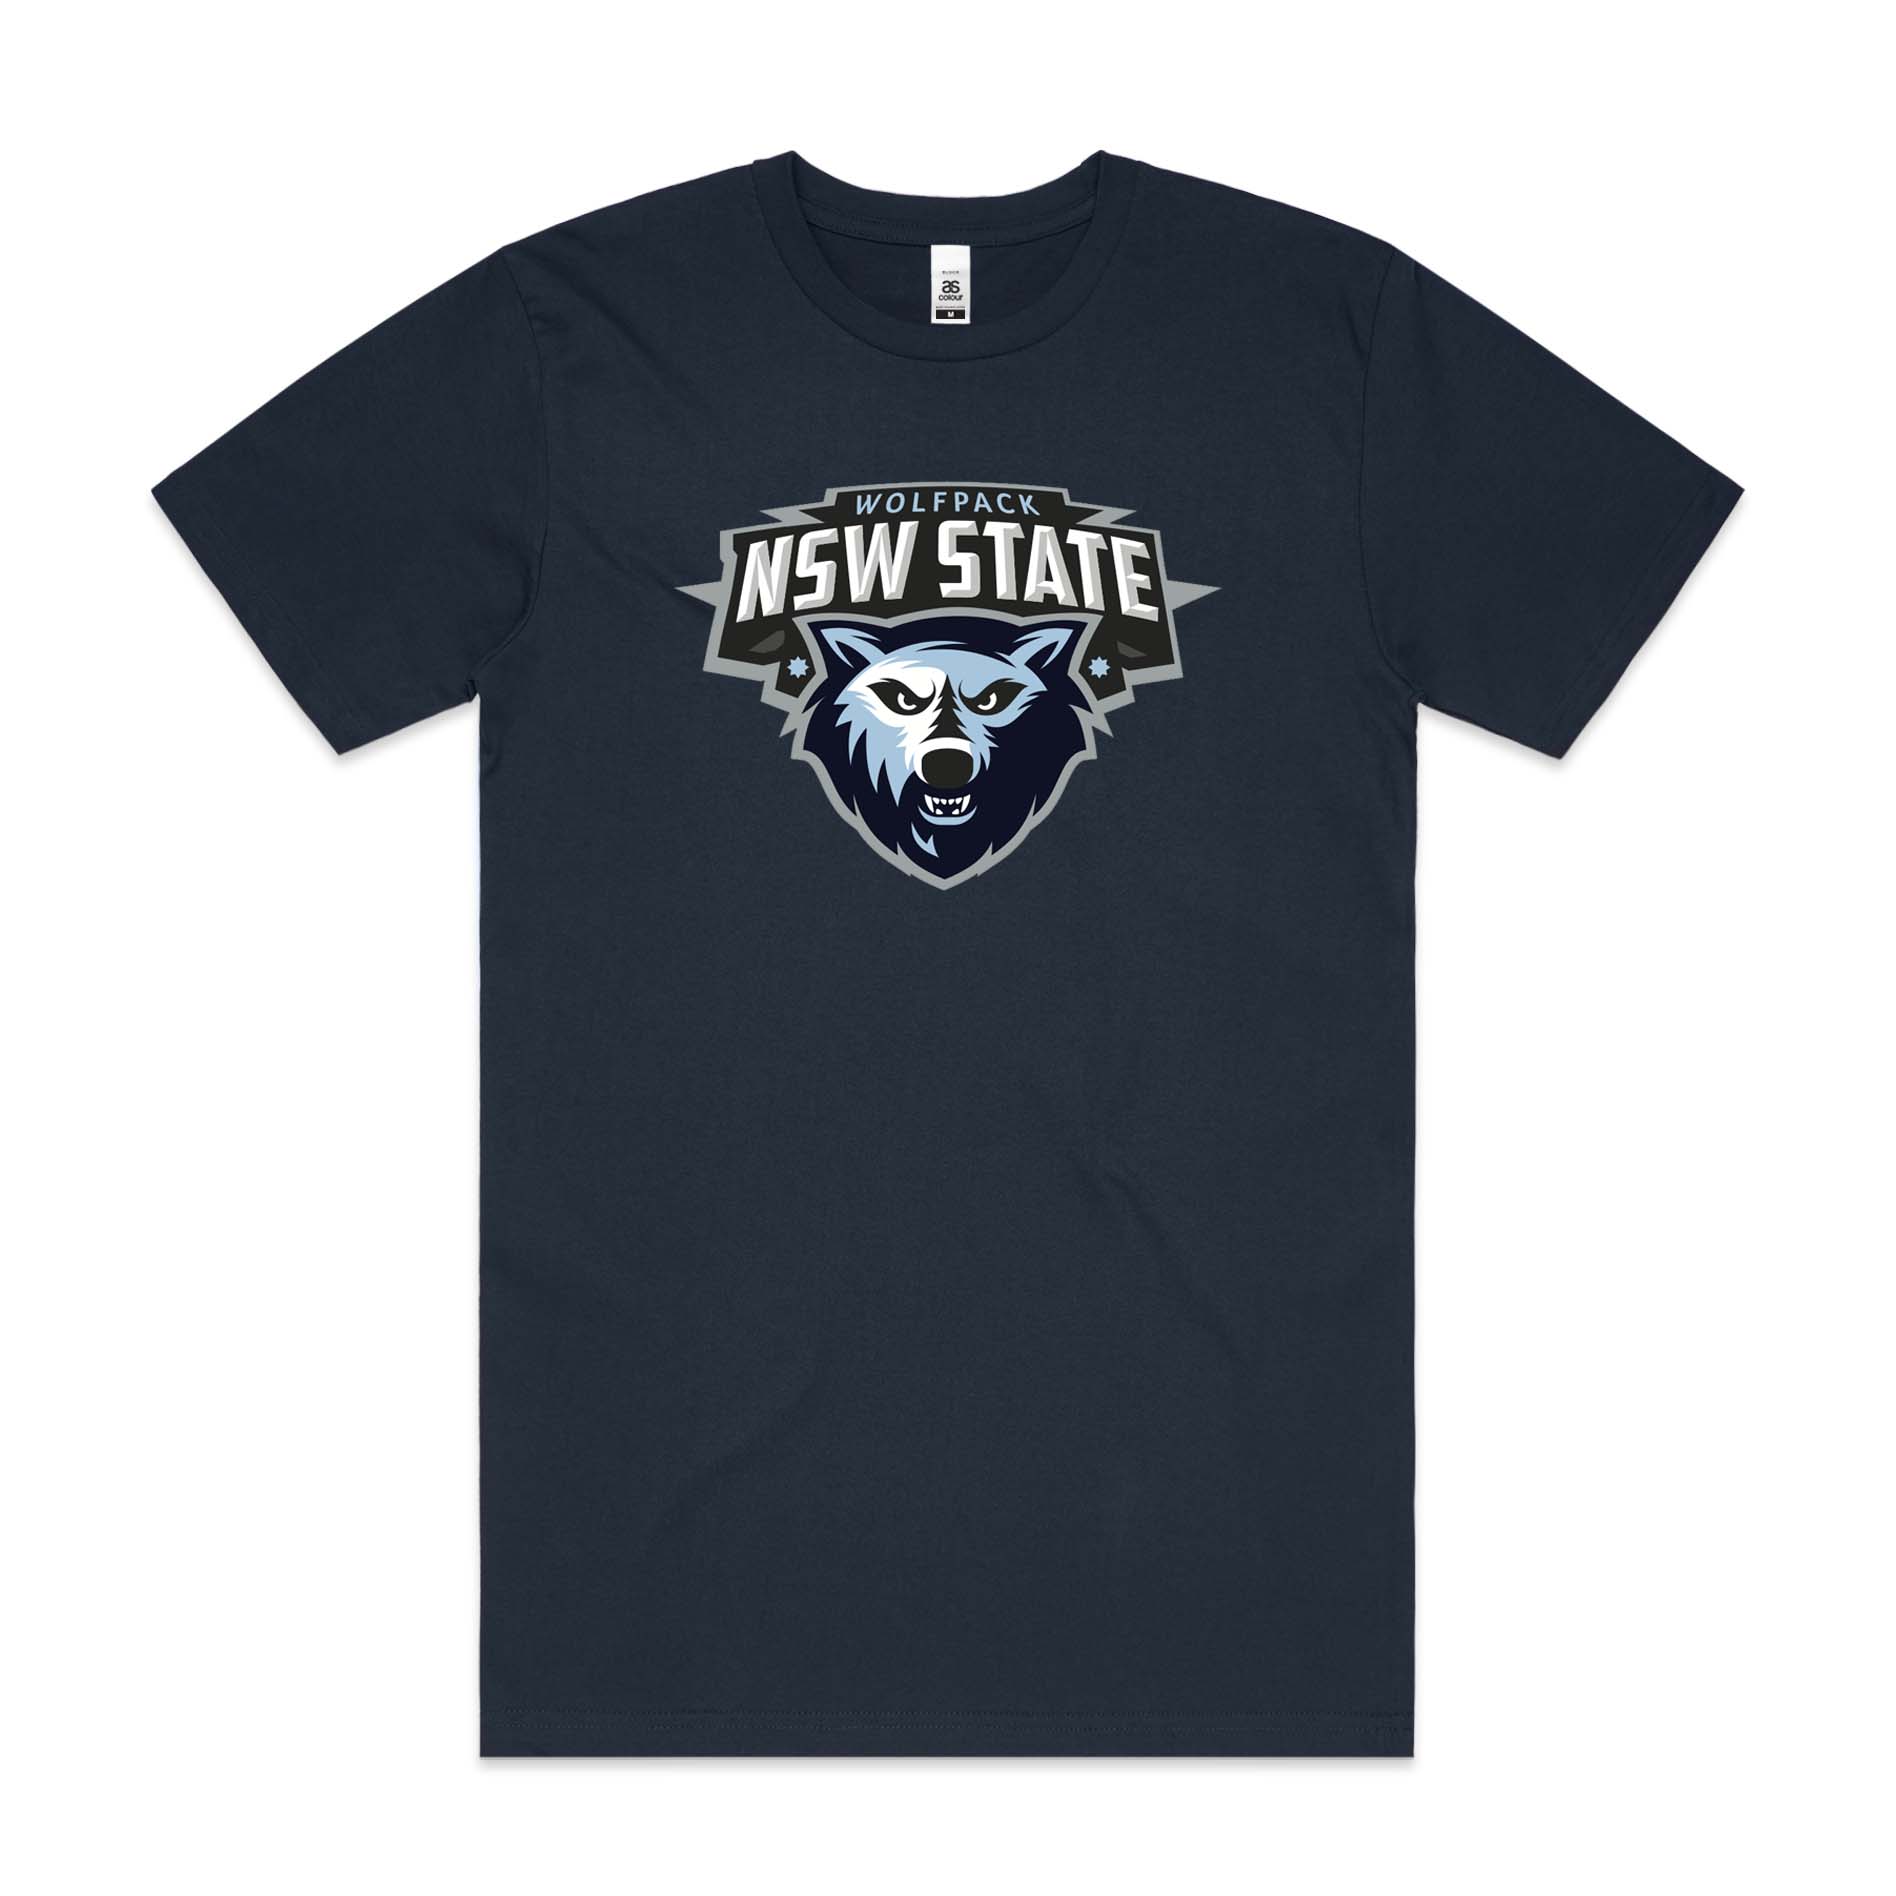 Wolfpack AS Navy T-shirt